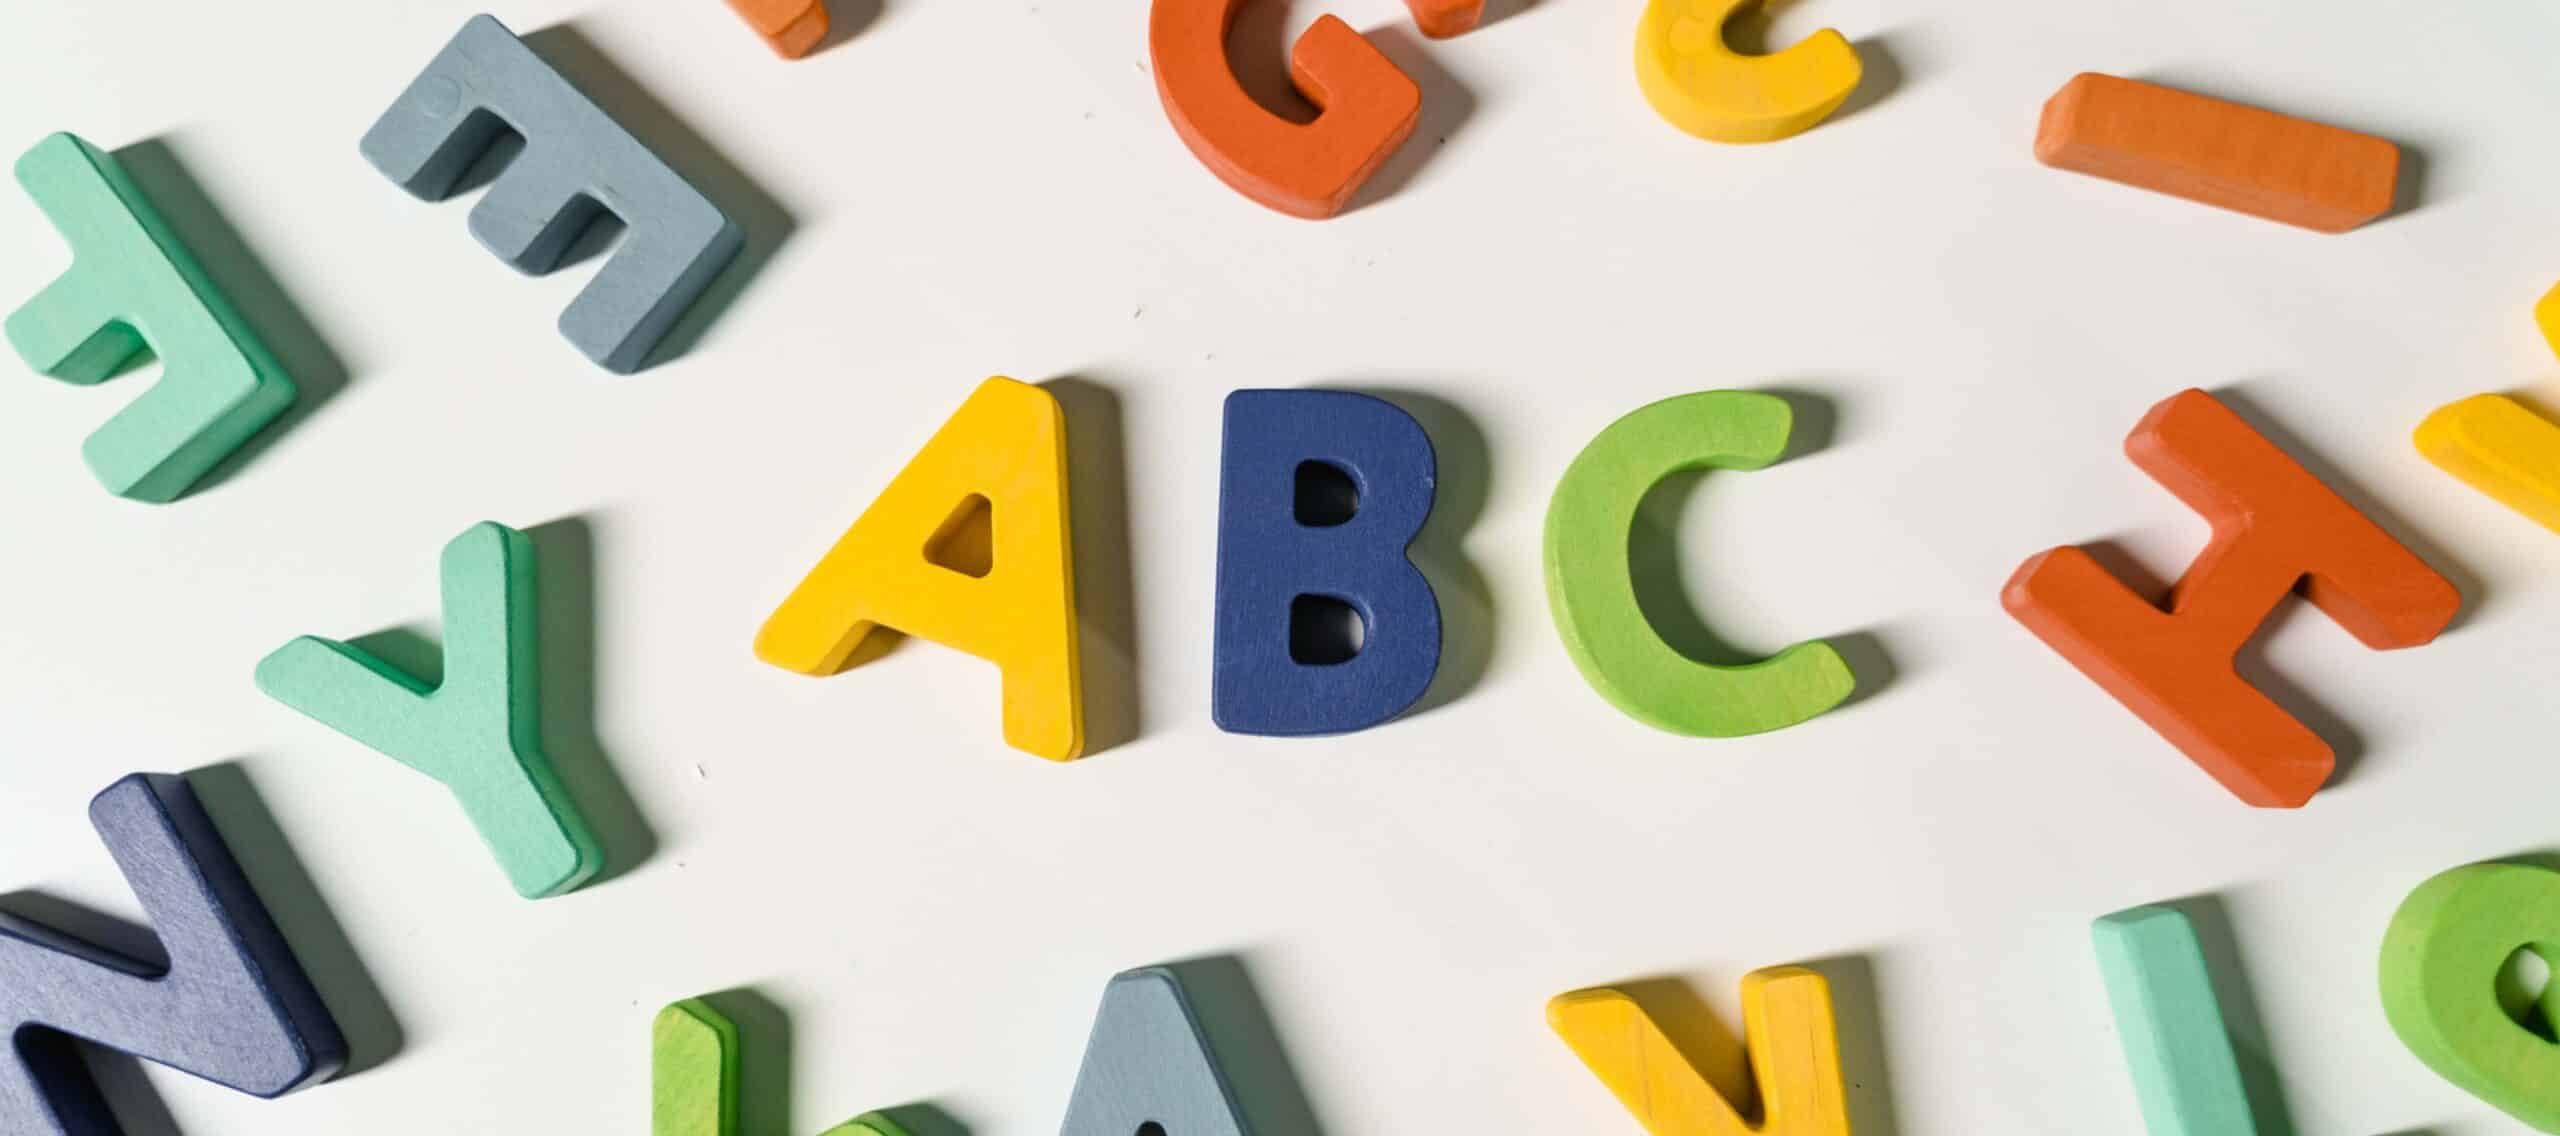 The ABCs of Mutual Fund Share Classes